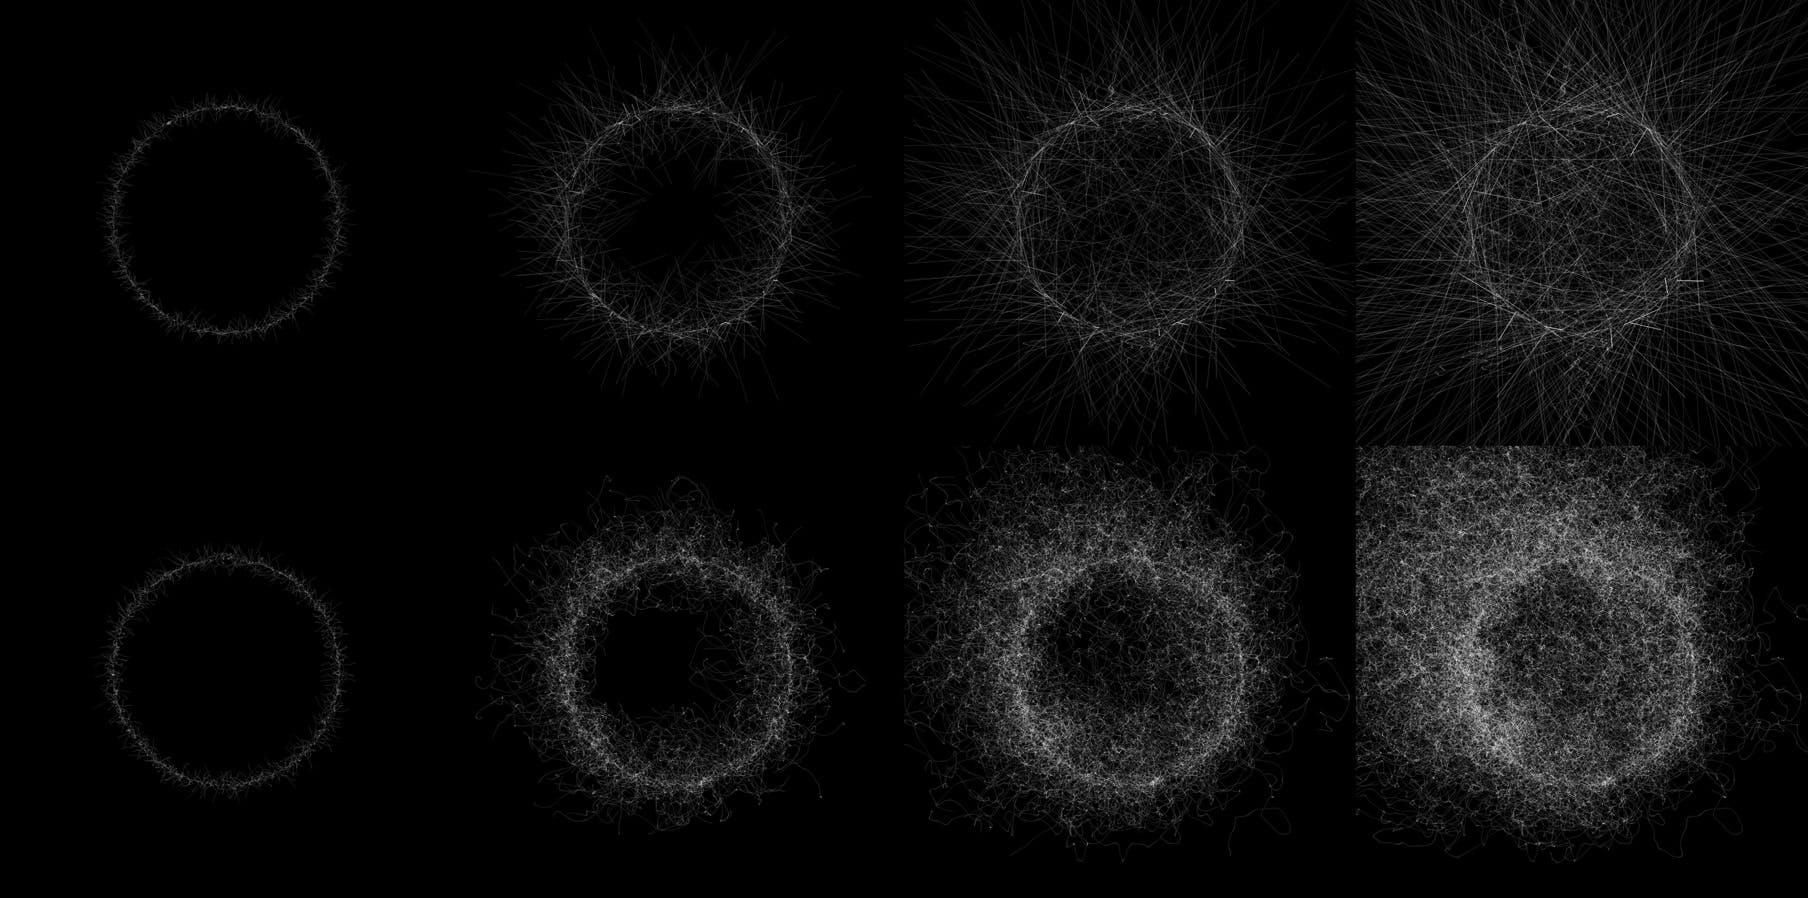 A generative art piece with two rows of four frames. Both rows feature a series of 1,000 points arranged around a circle. In each frame, the points move to a new location. In the top row, the points move linearly. In the bottom row, the points move in a random direction.